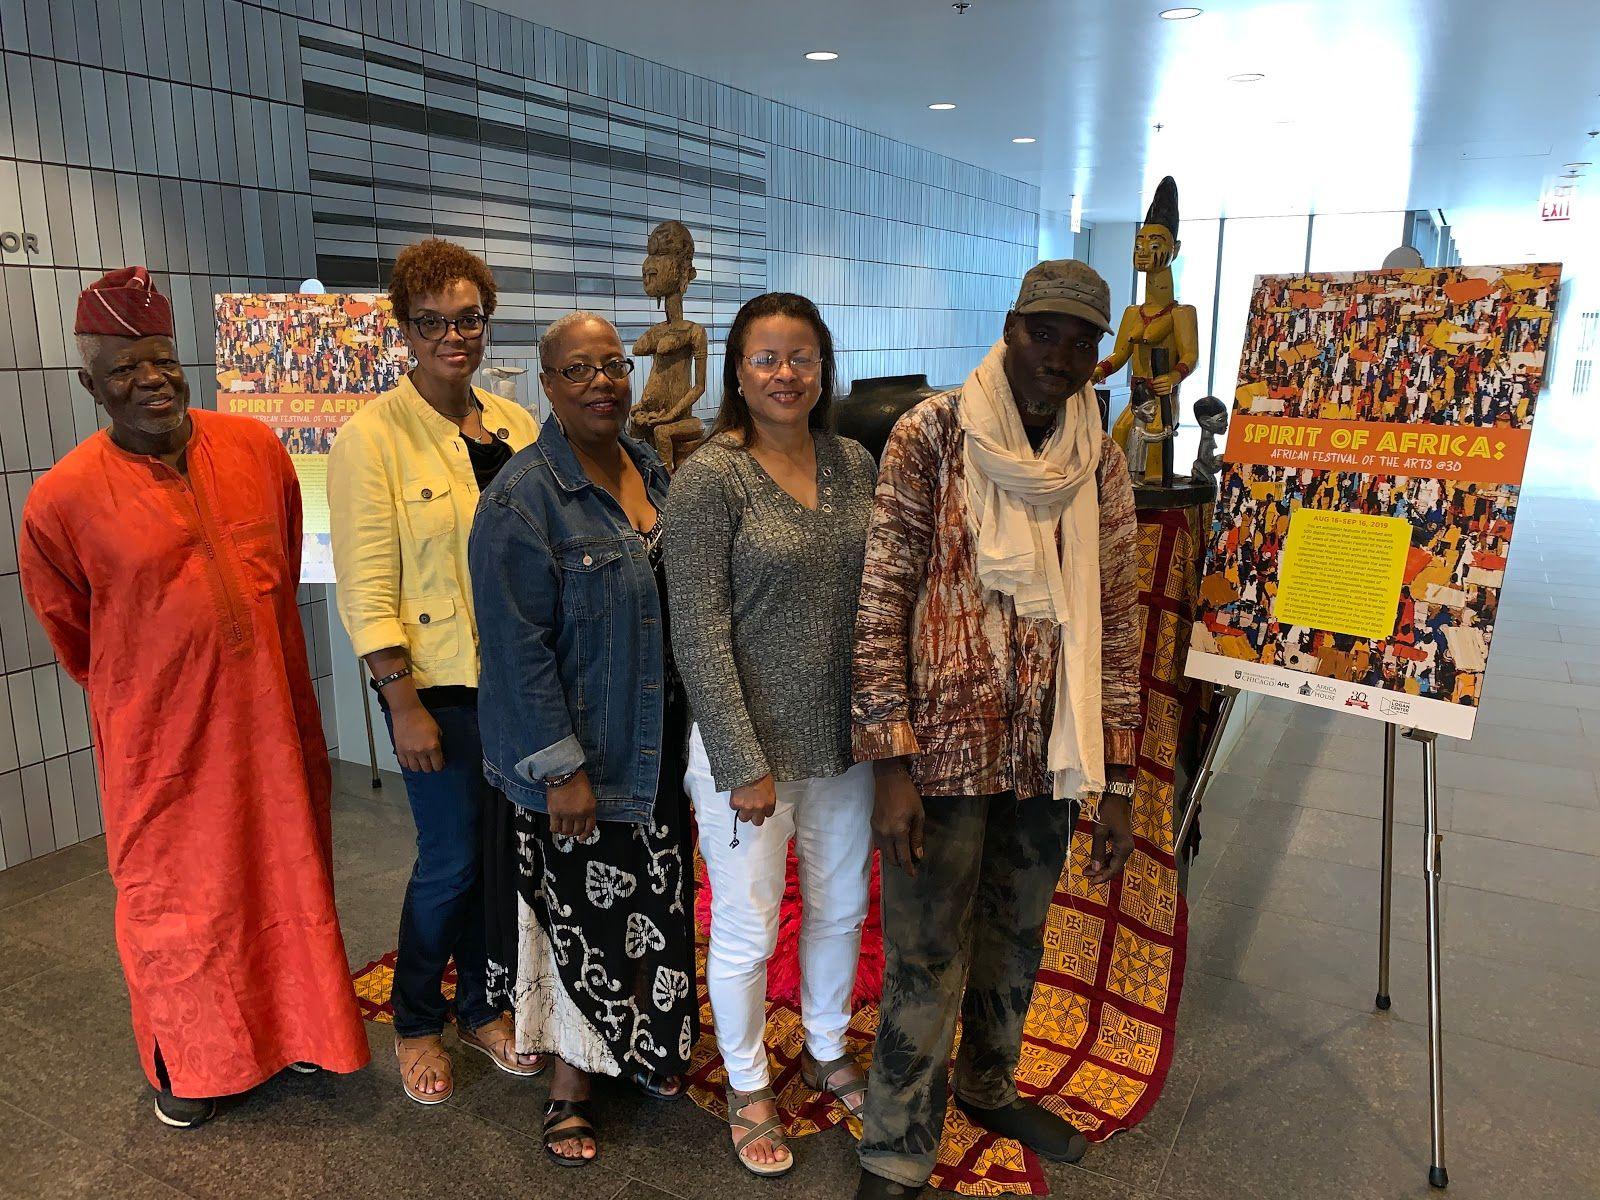 From left: Festival founder Patrick Saingbey-Woodtor, photographer Sonja Hughes, quilter Susan Trice, photographer Kaye Cooksey and collector Diarra Diaby. (Angel Idowu / WTTW News)